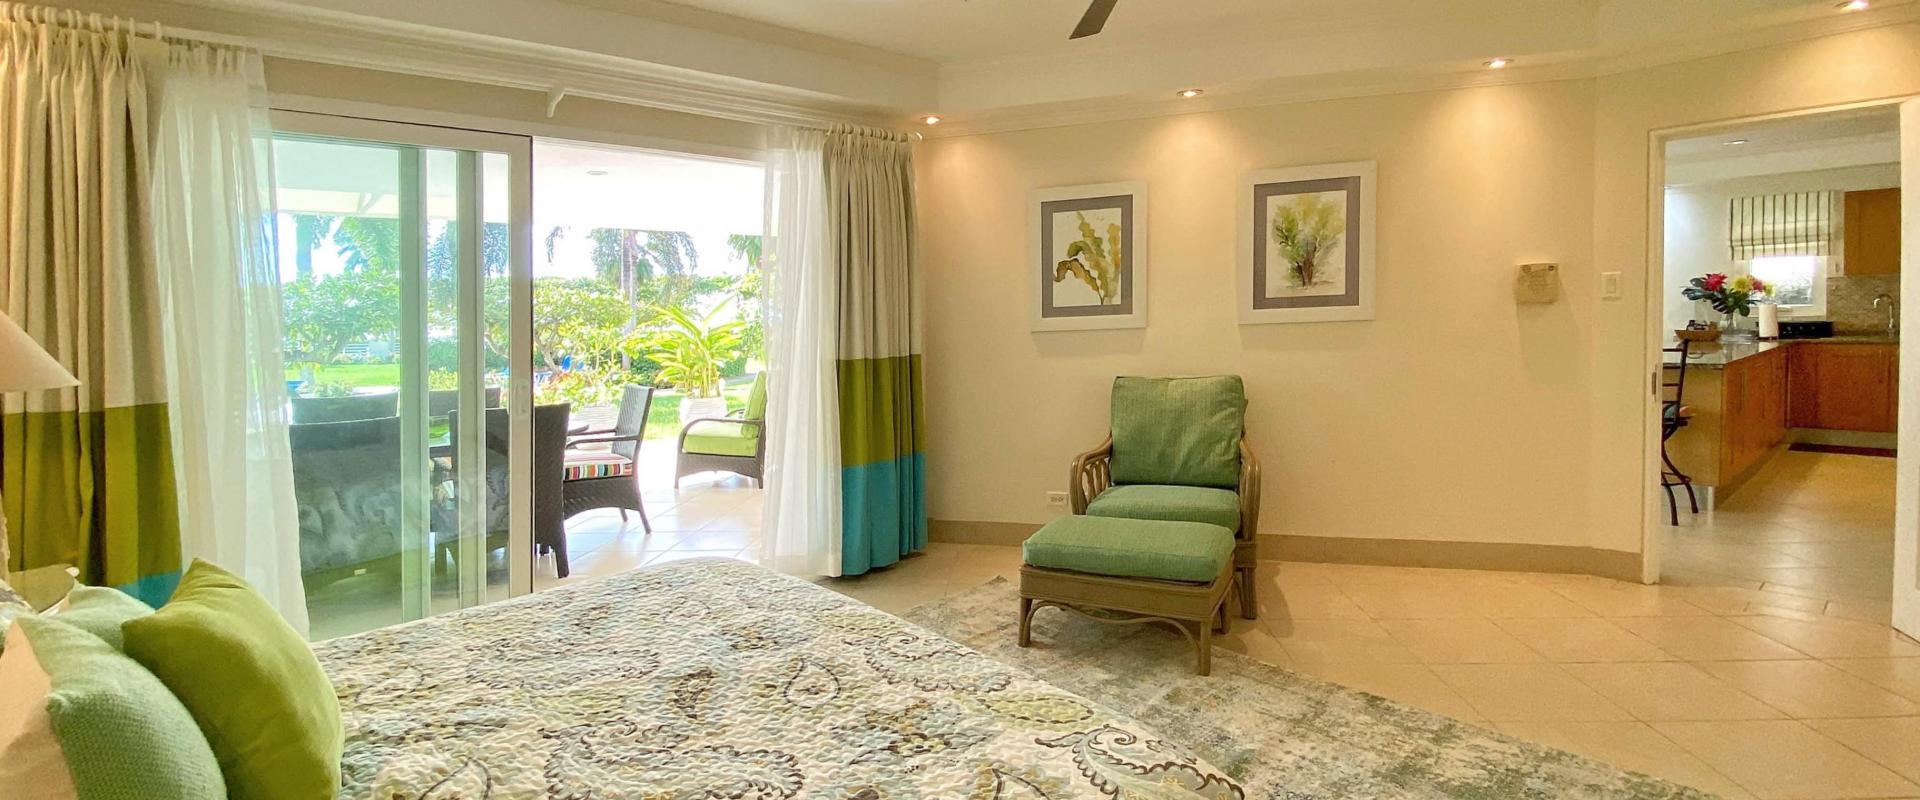 Palm Beach 211 Barbados Beachfront Vacation Condo Rental Primary Bedroom with King Bed